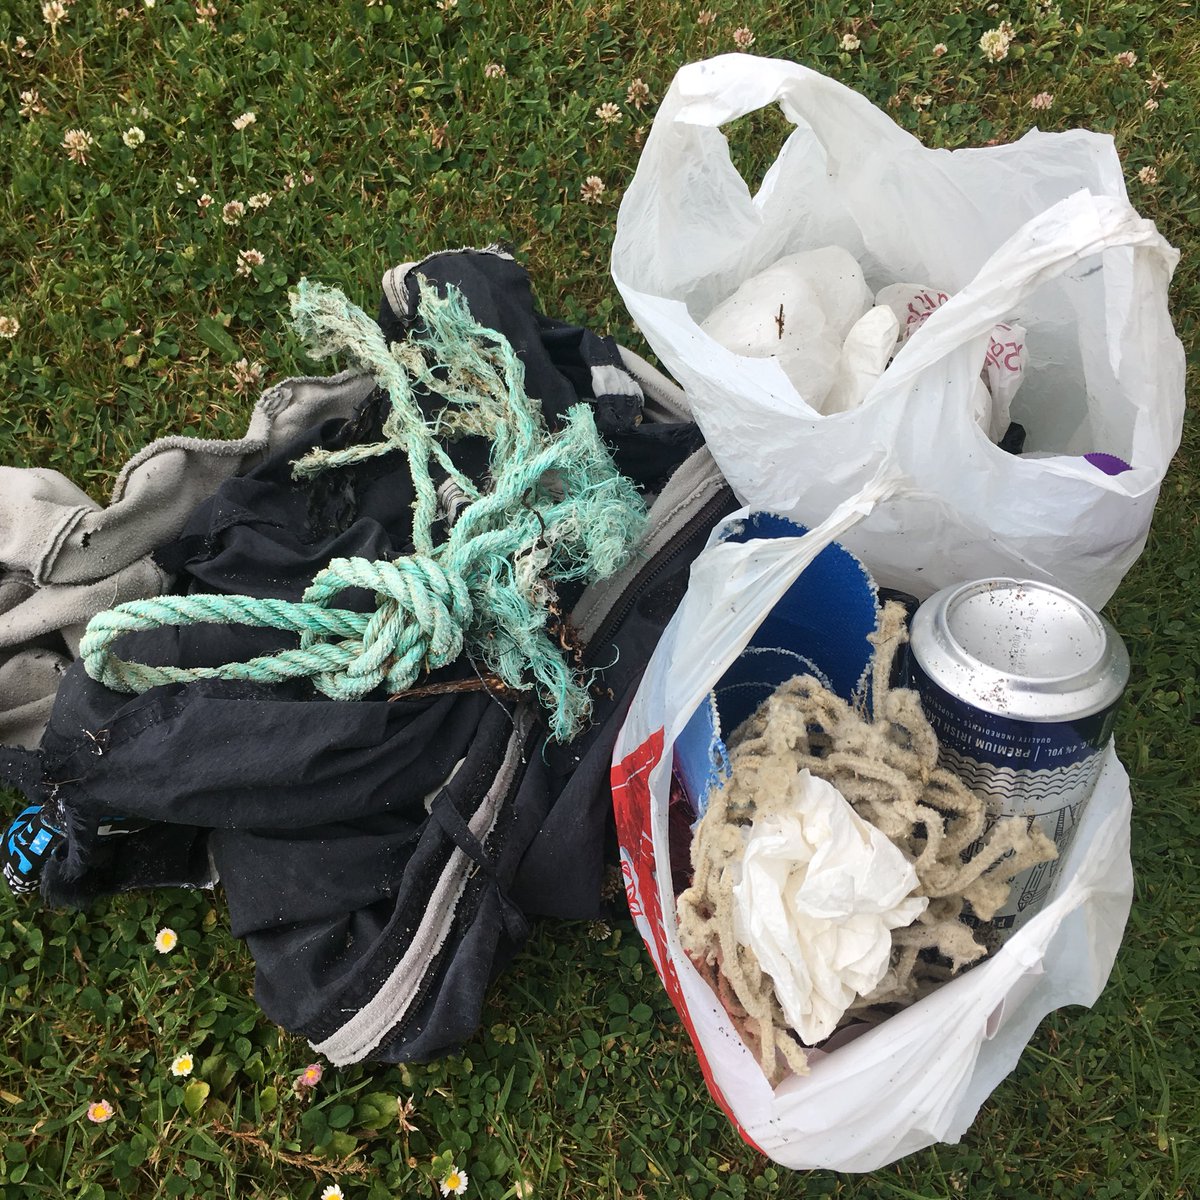 Day 17 #30dayswild 🌿🌿@30DaysWild quick beach sweep while walking the dog, using bags found on the beach #beachclean #loveourearth #loveouroceans #naturelover #onlytakesaminute #doingmybit